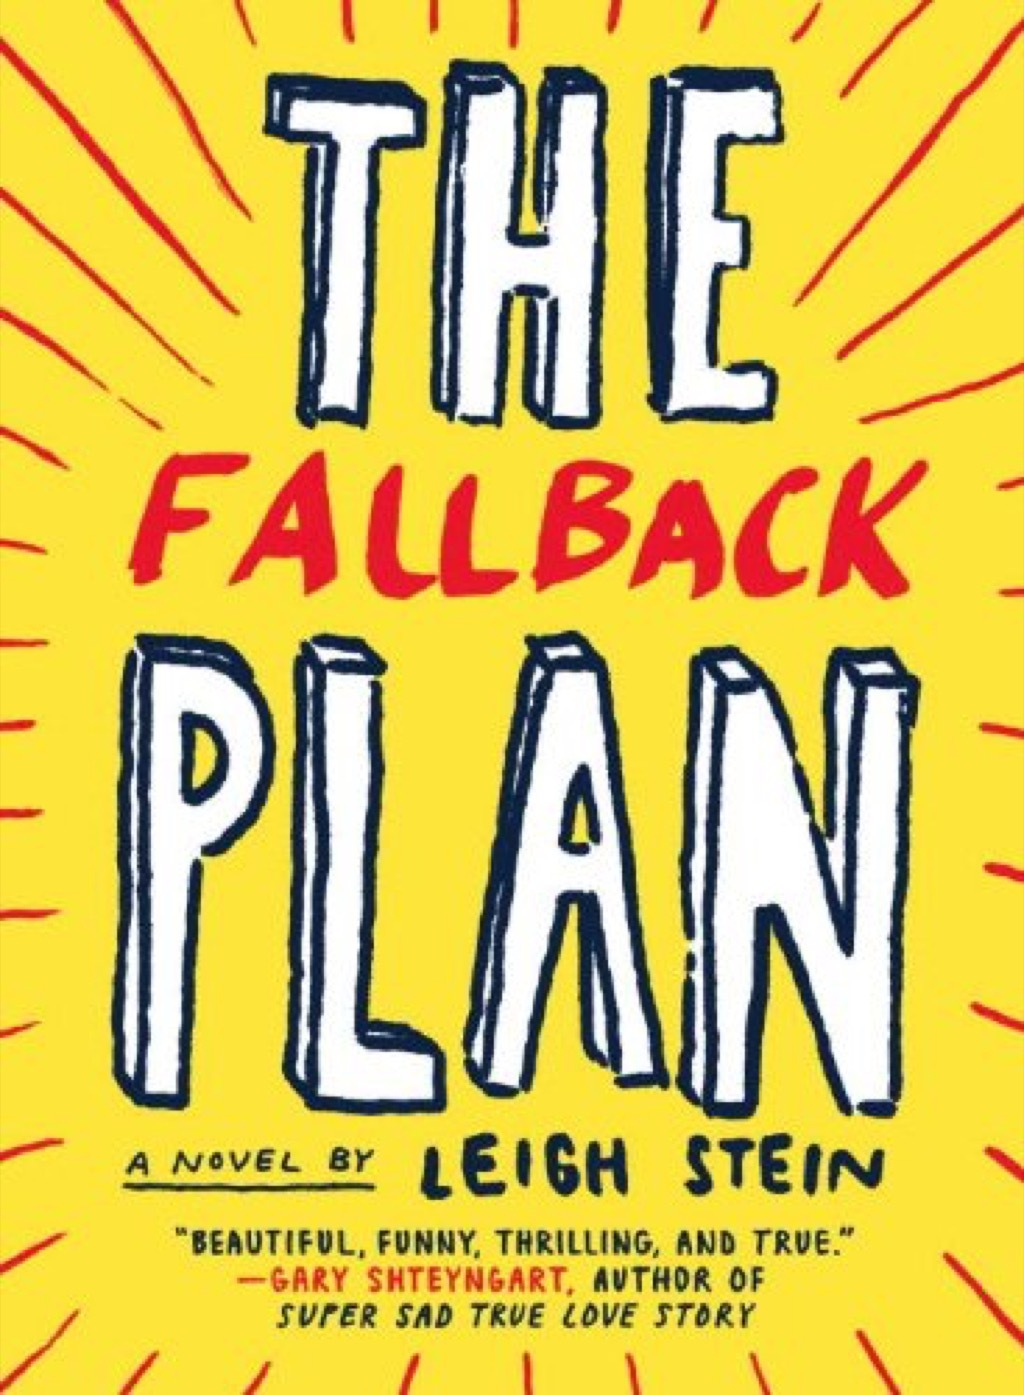 The Fallback Plan by Leigh Stein